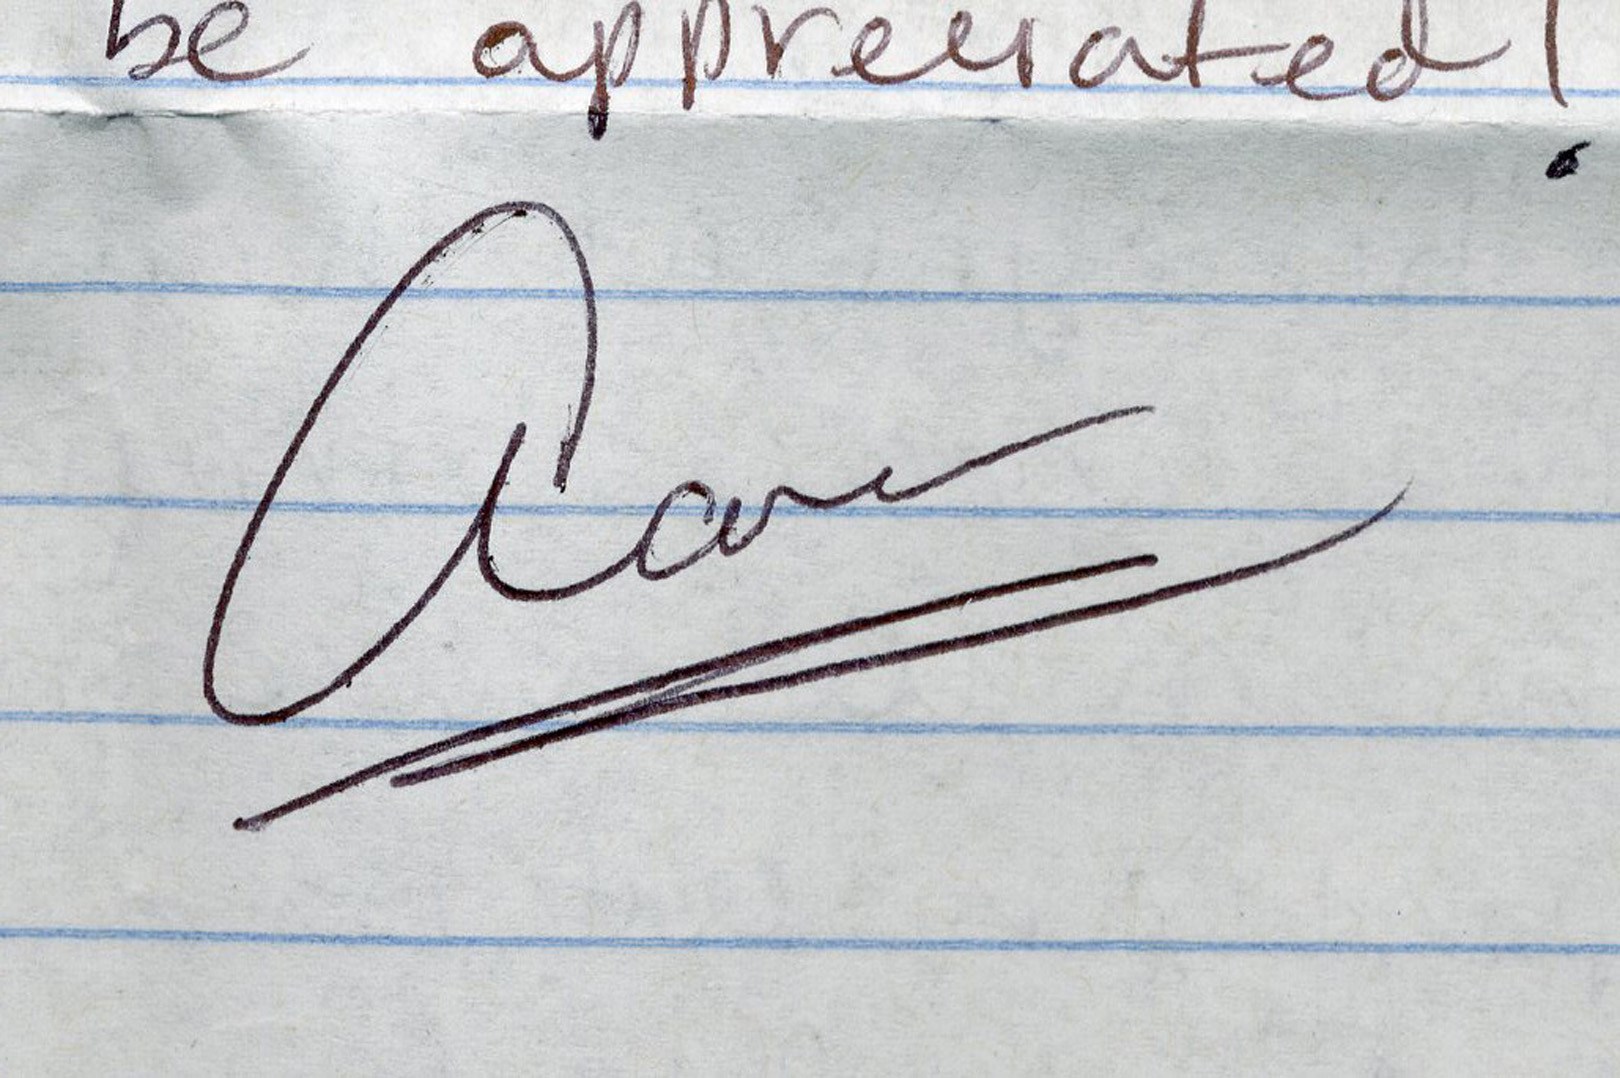 - Aaron Hernandez "Stay Out of Trouble" Handwritten Letter with "Unknown Substance"